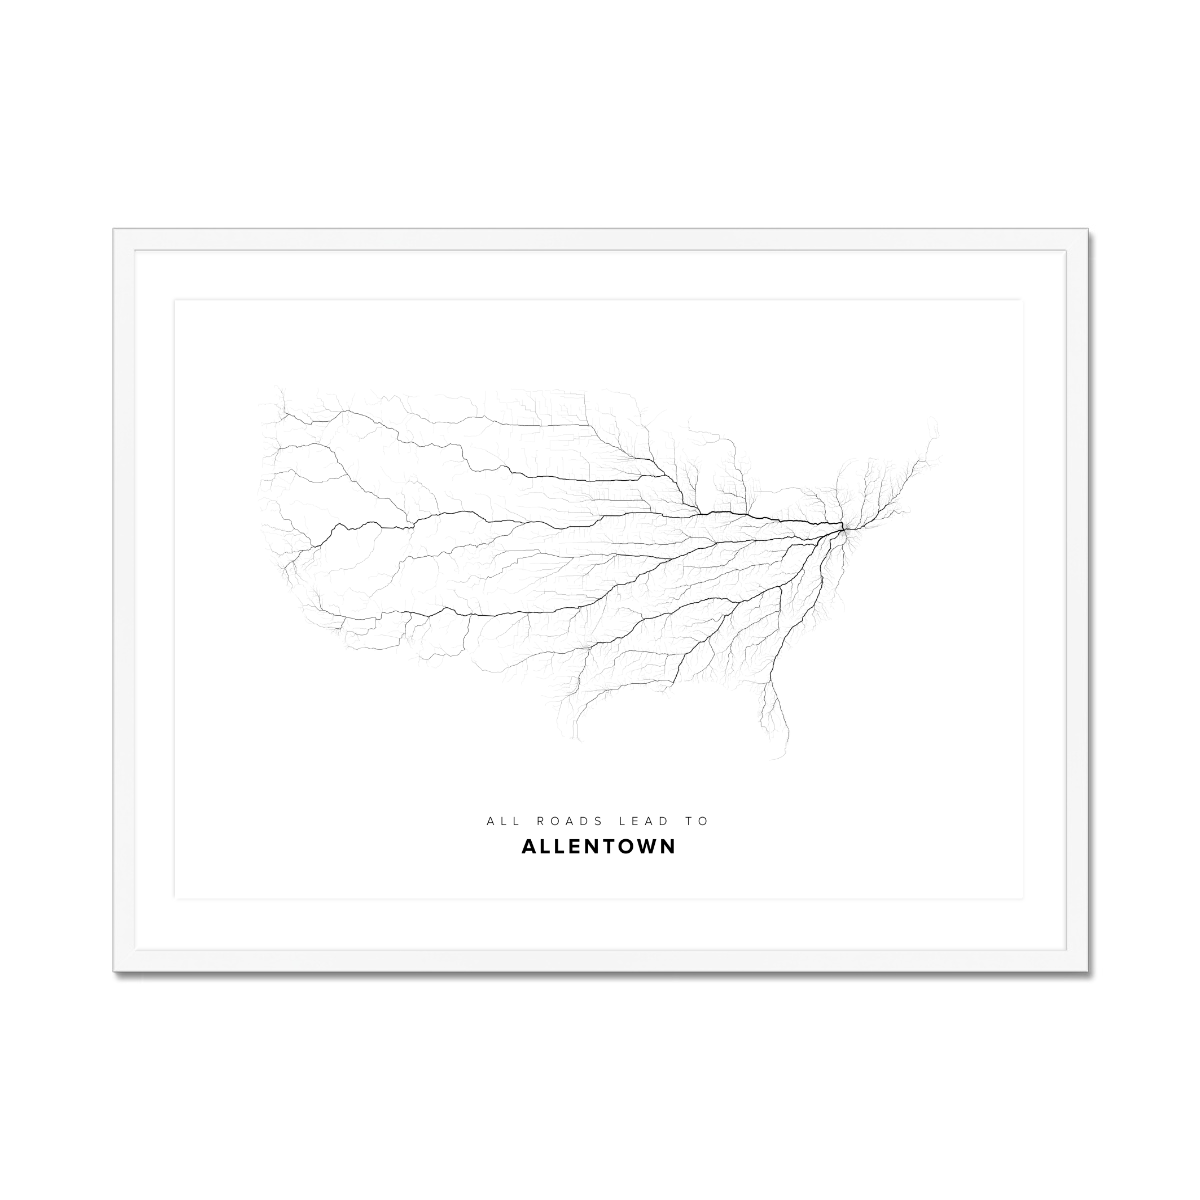 All roads lead to Allentown (United States of America) Fine Art Map Print